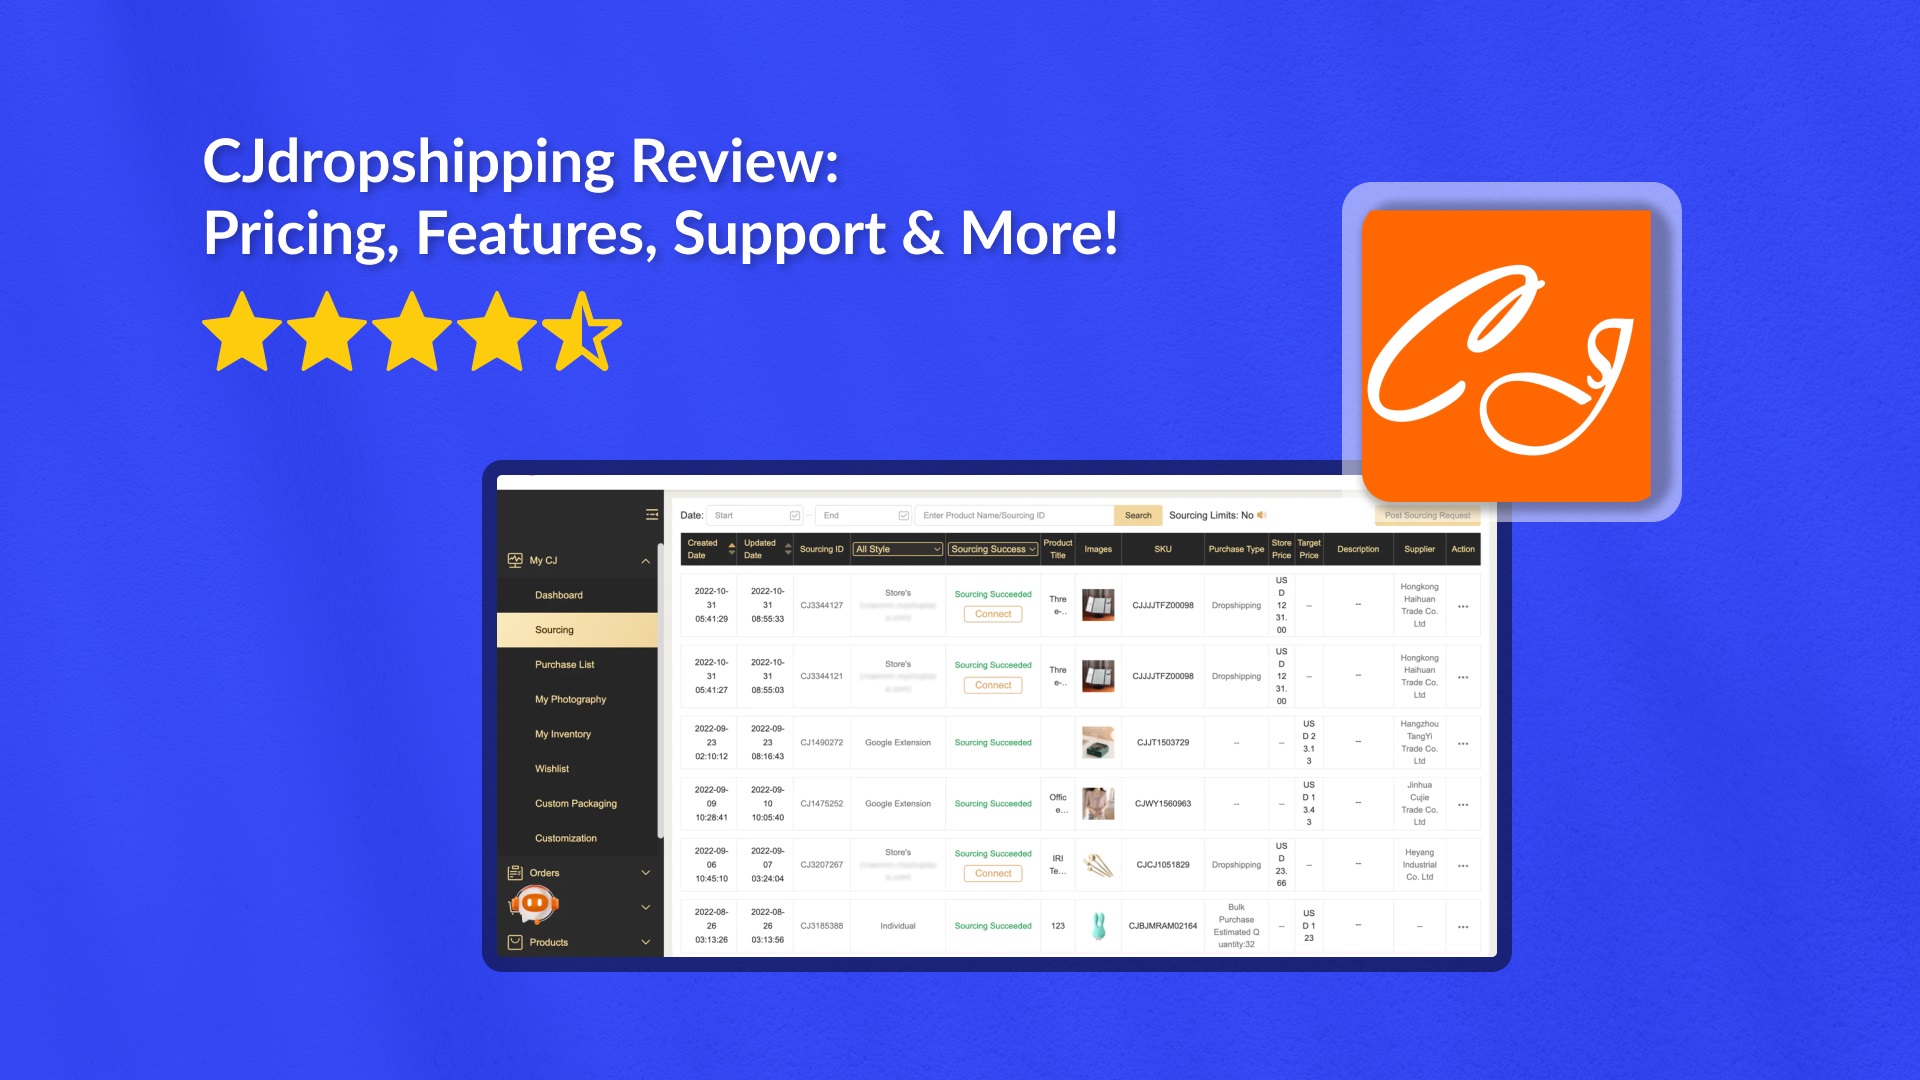 Cover image showcasing the post's title, app rating, CJdropshipping's logo, and a screenshot of the app in action